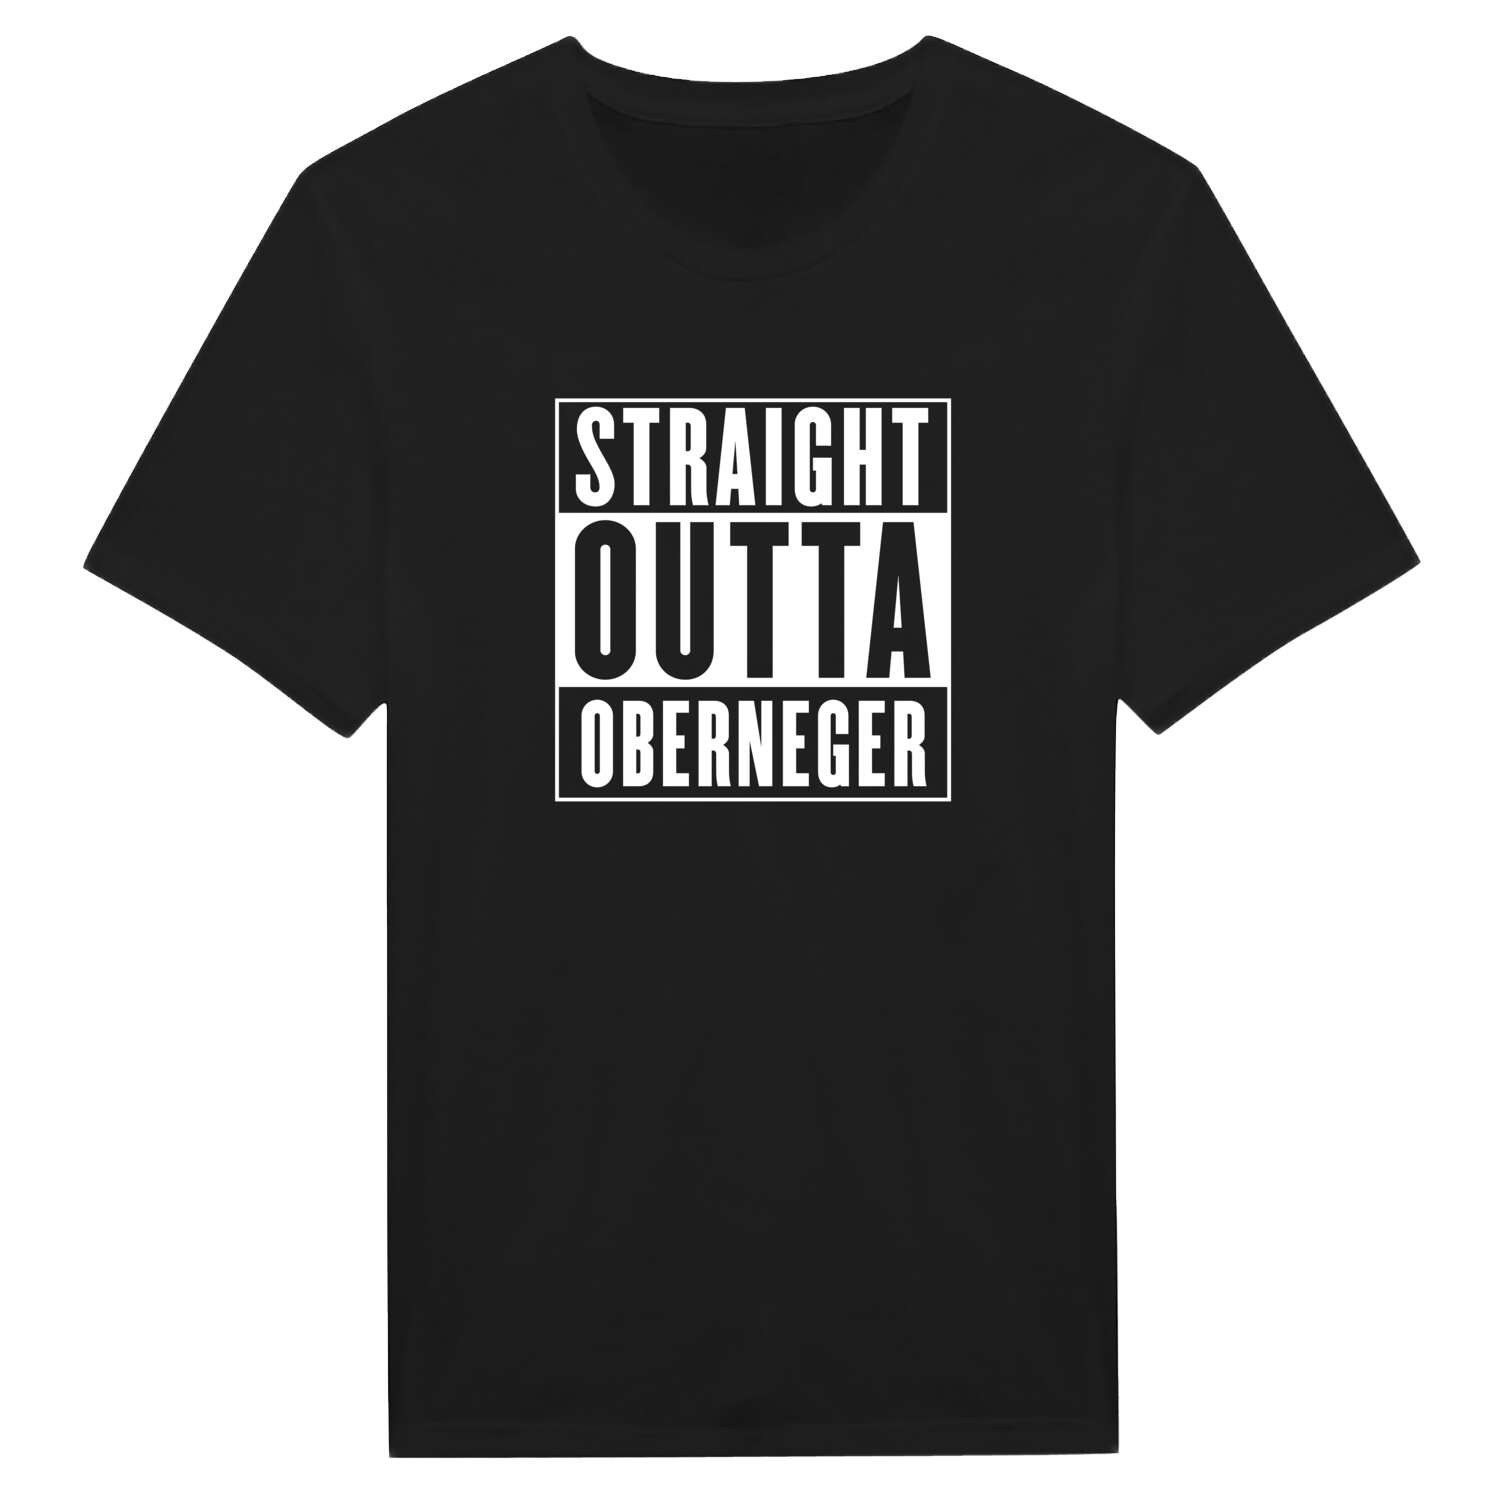 Oberneger T-Shirt »Straight Outta«